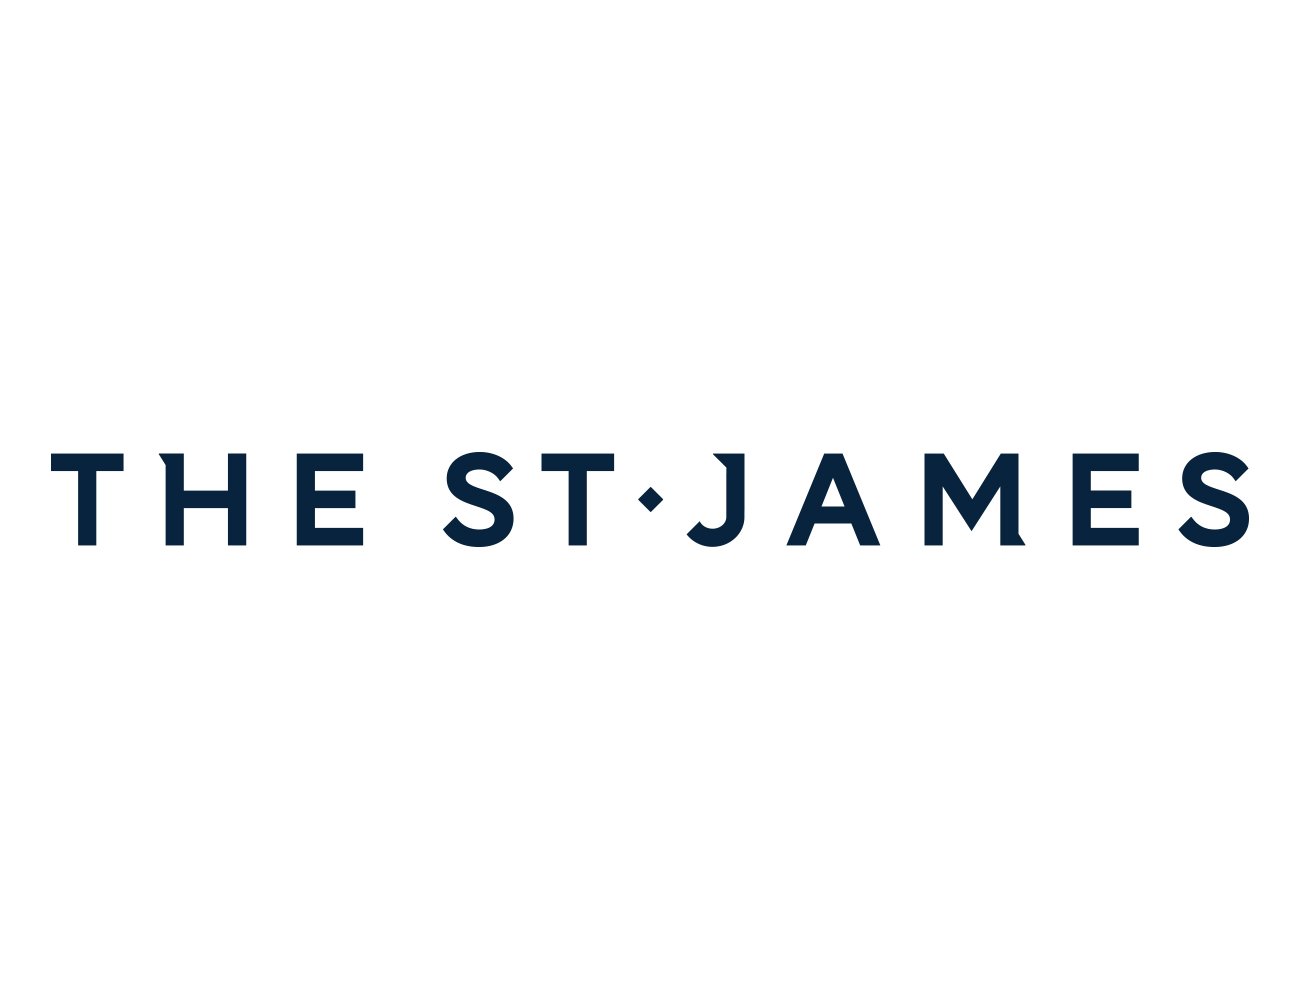 The St James